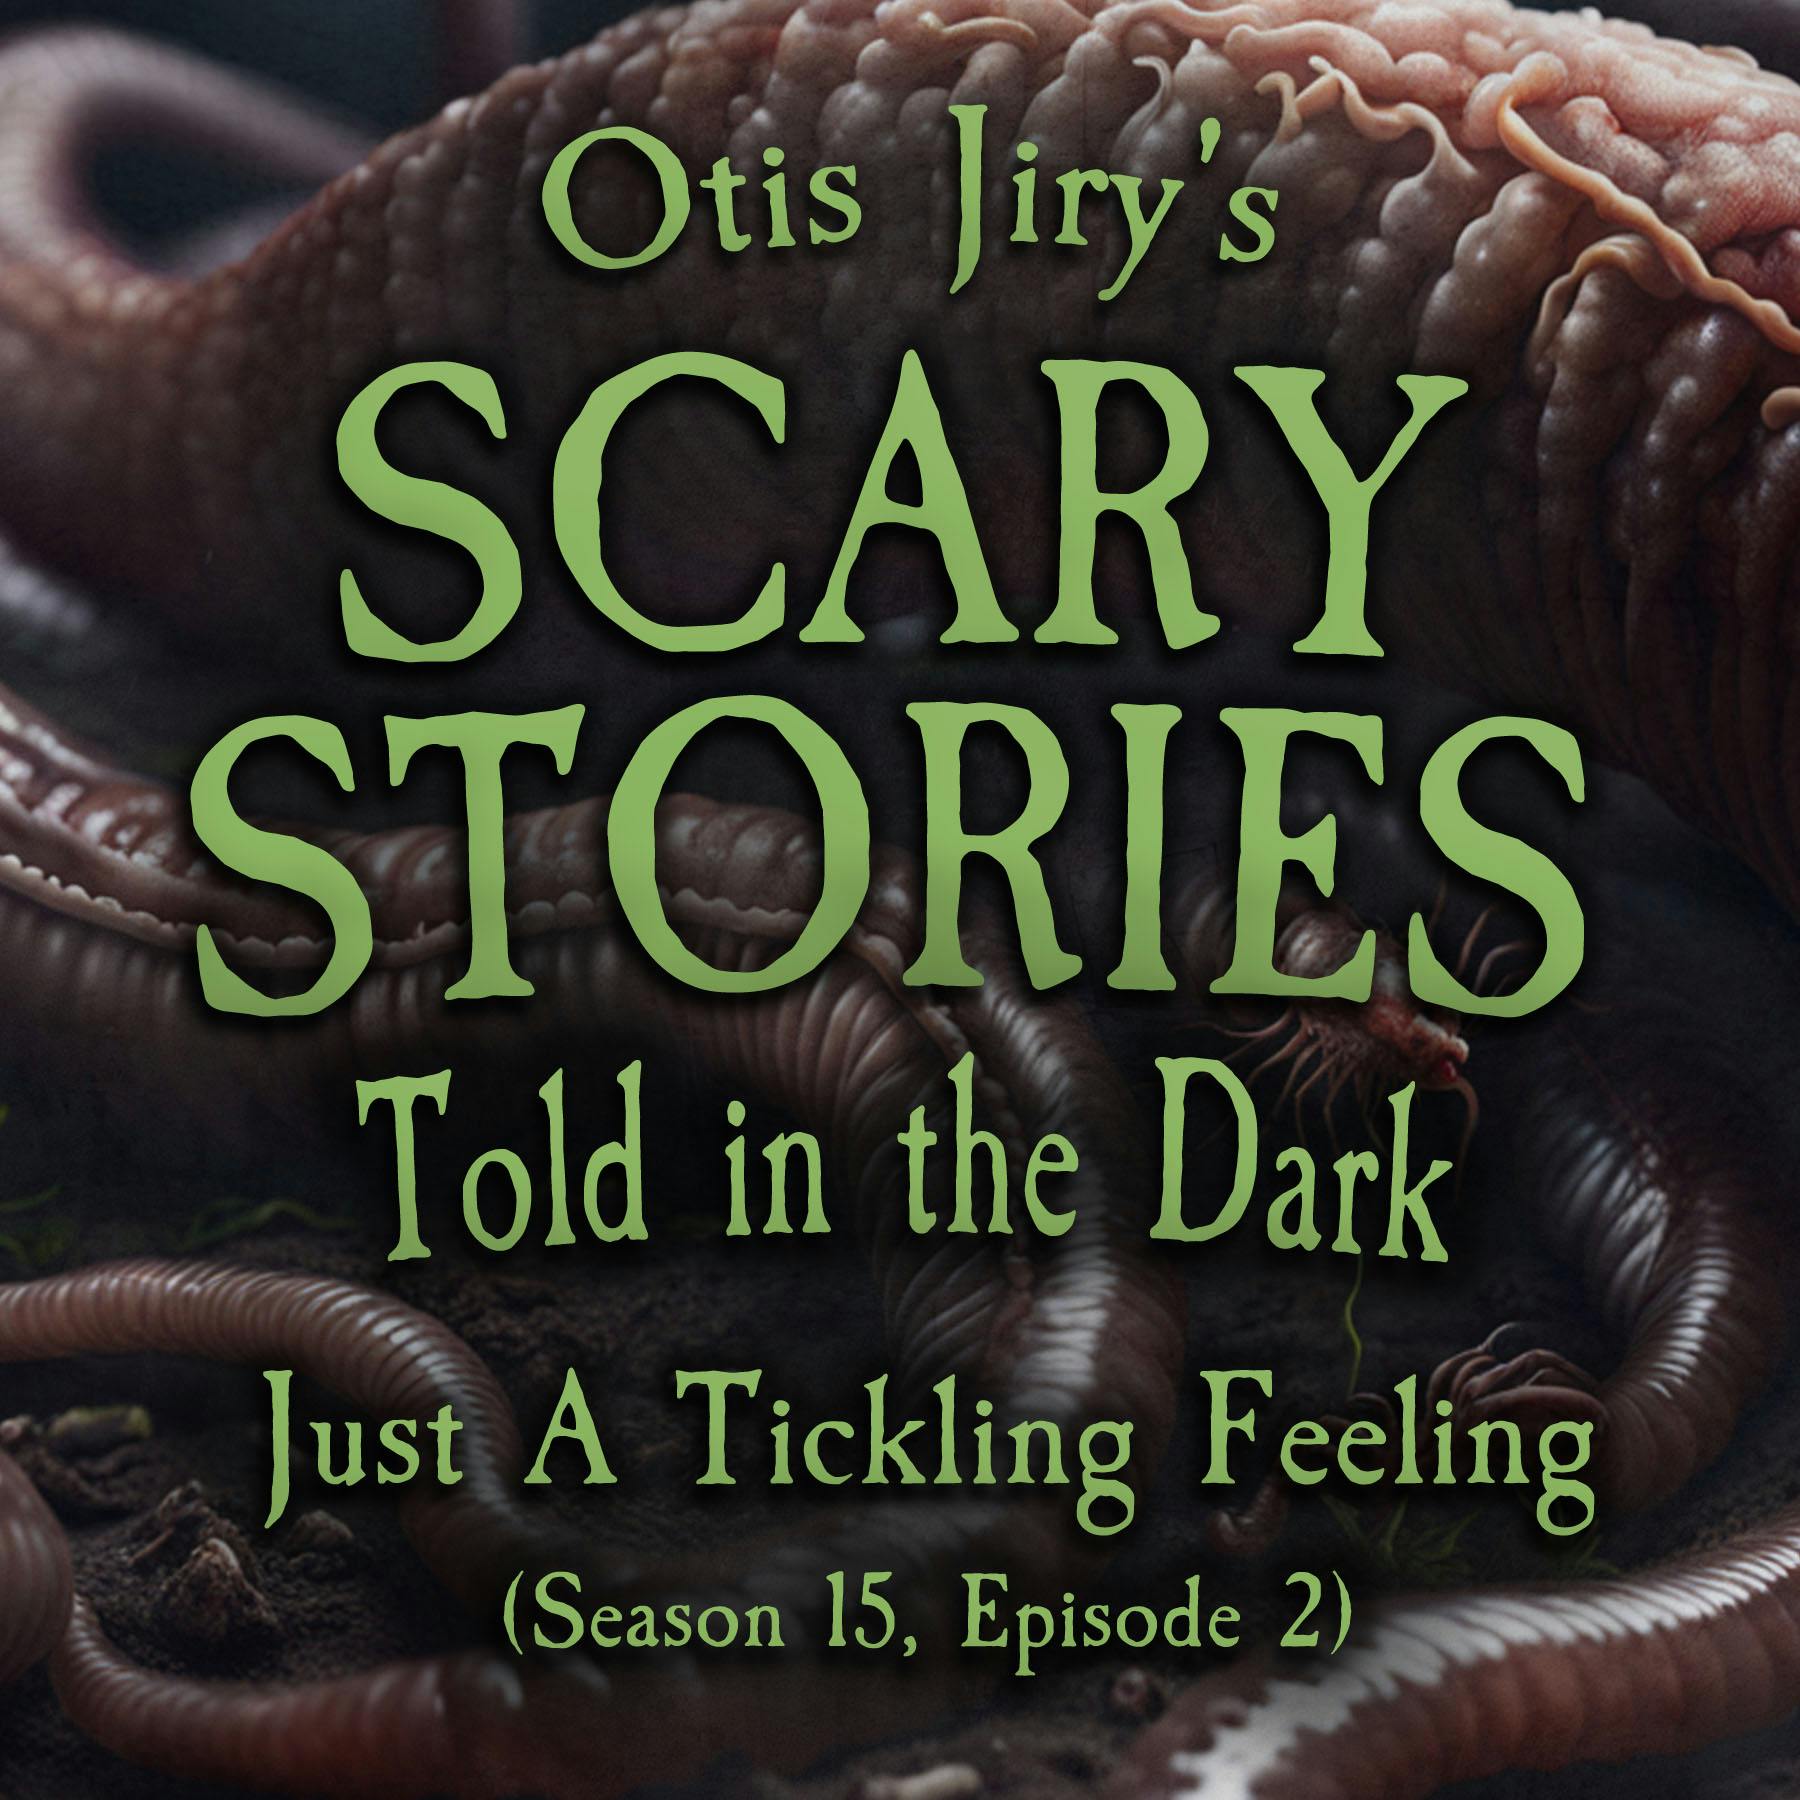 S15E02 - ”Just a Tickling Feeling” – Scary Stories Told in the Dark